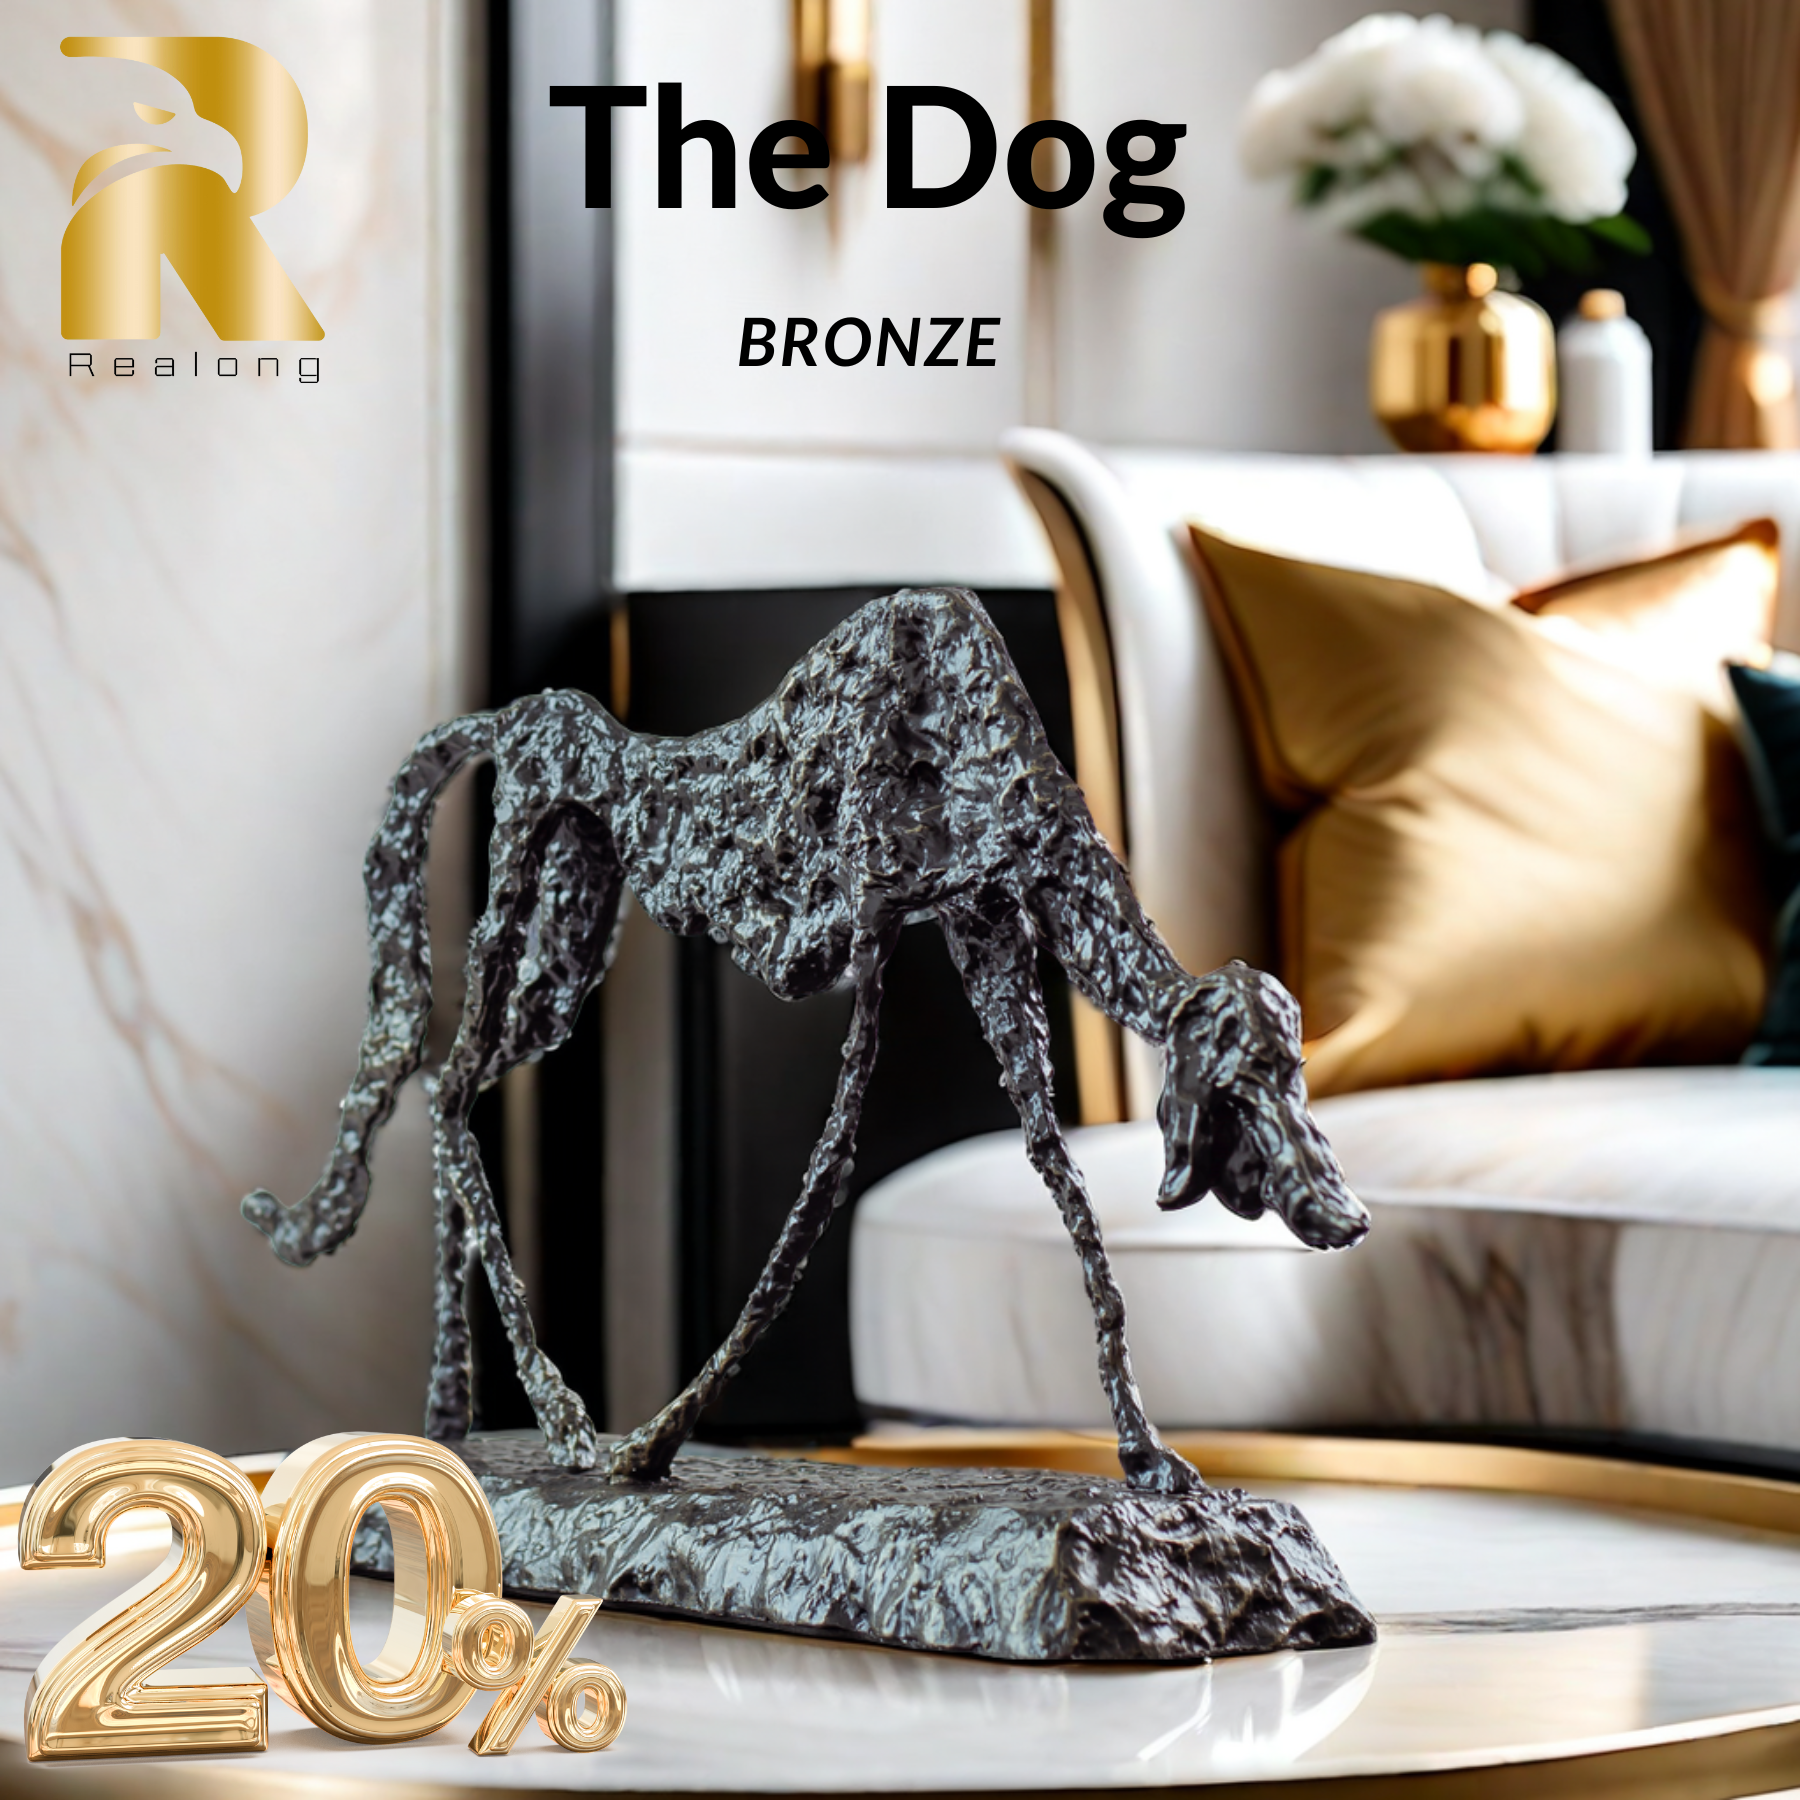 "The Dog" Bronze/Metal Sculpture Replica by Alberto Giacometti - Famous Abstract Bronze/Metal Animal Sculpture-Iconic Modern Art Statue for Home Decor and Collectors